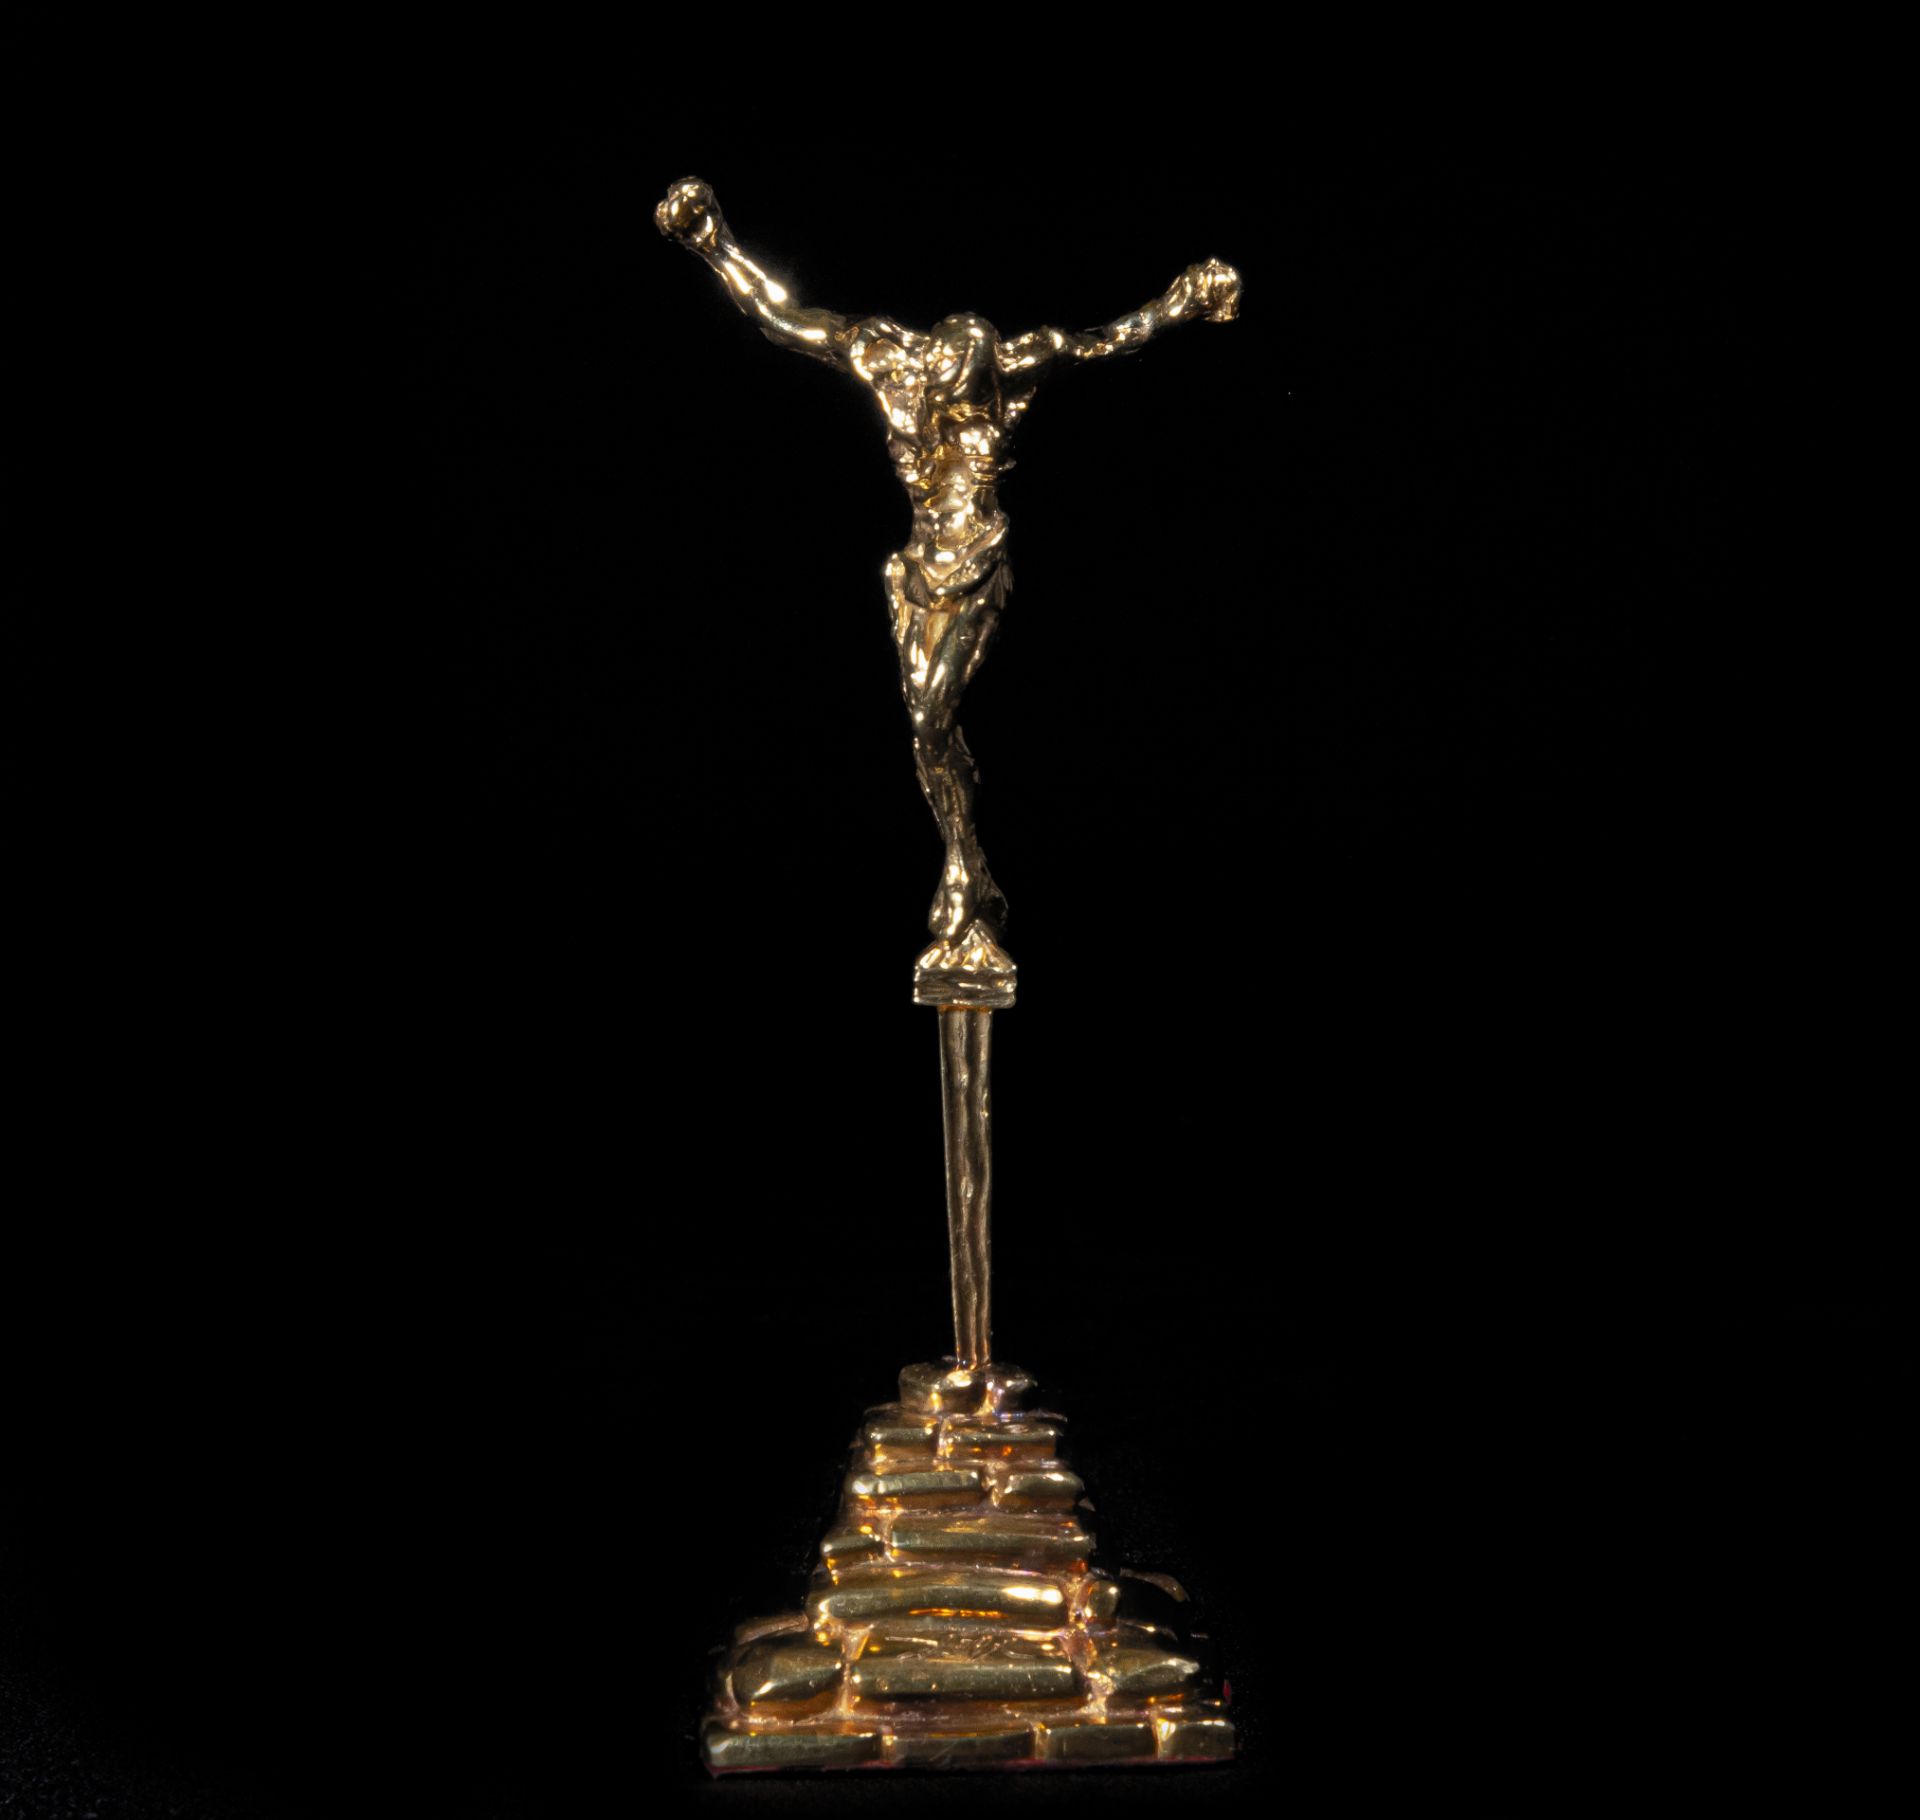 Salvador Dalí (Figueras, 1904 - Figueras, 1989), Saint John of the Cross in solid gold, with certifi